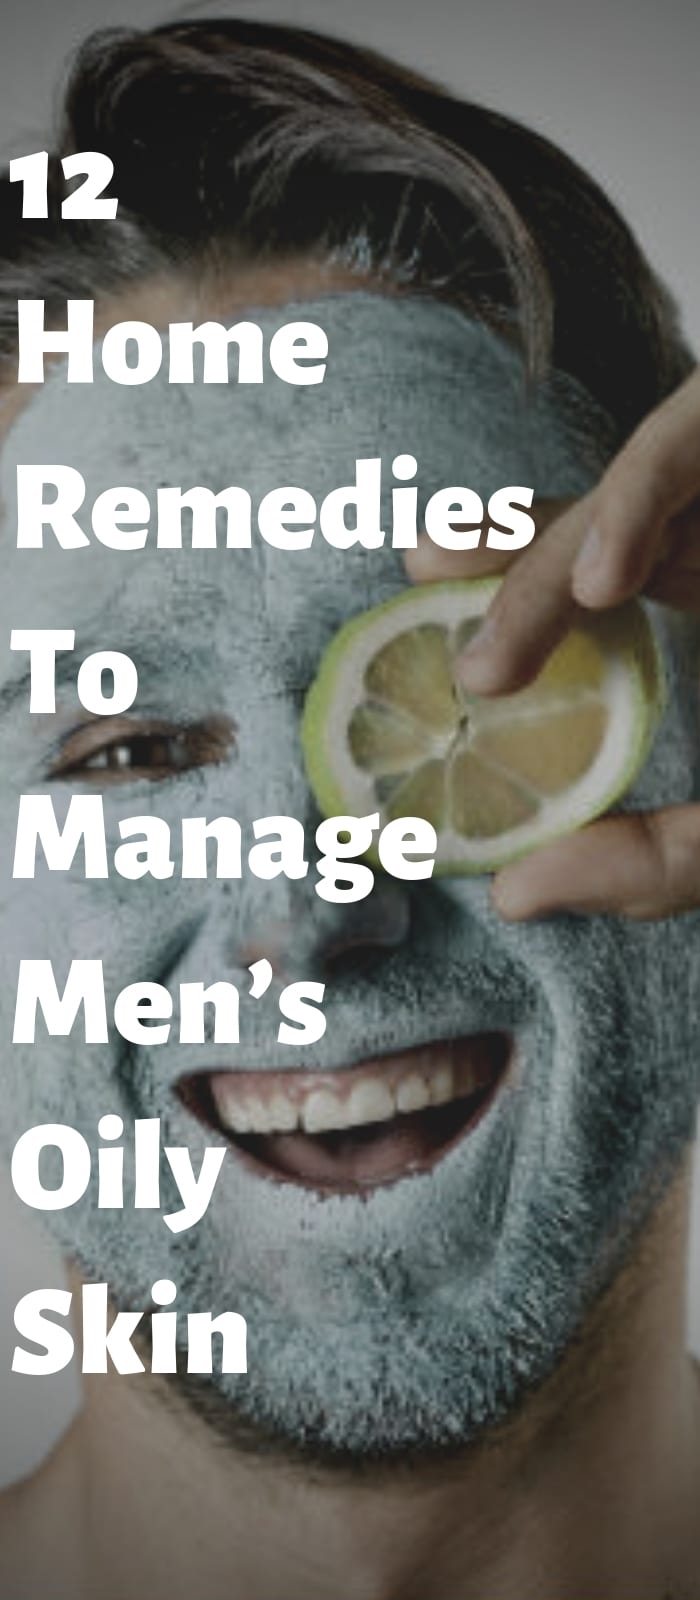 12 Home Remedies To Manage Men’s Oily Skin